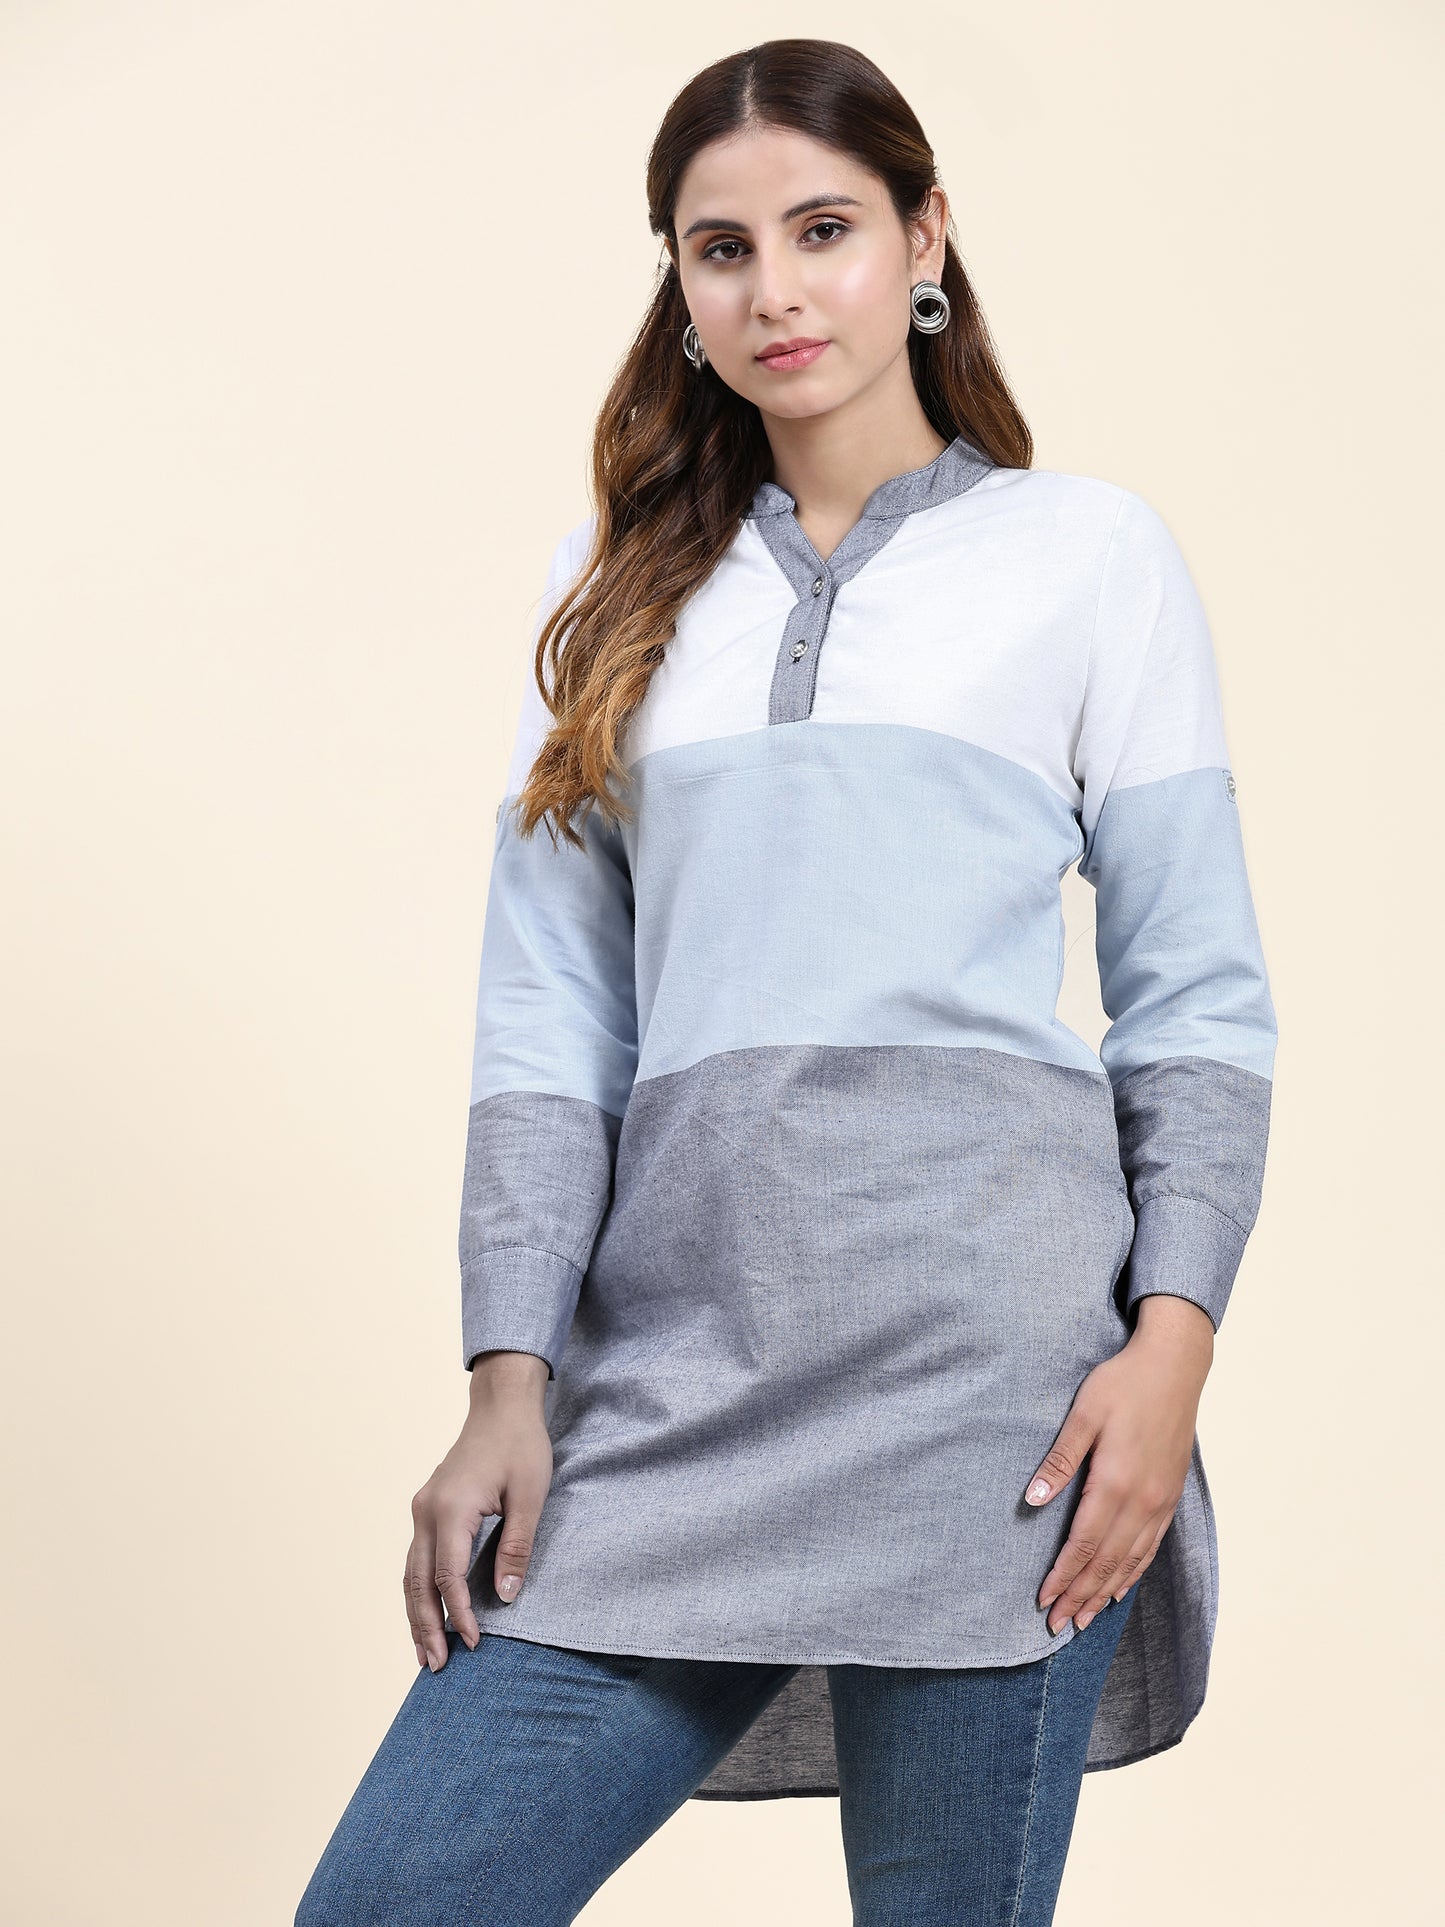 ANUSHIL Women's Cotton Multi Stripe Shirts: Comfortable and Fashionable with V-Neck and Sleeves